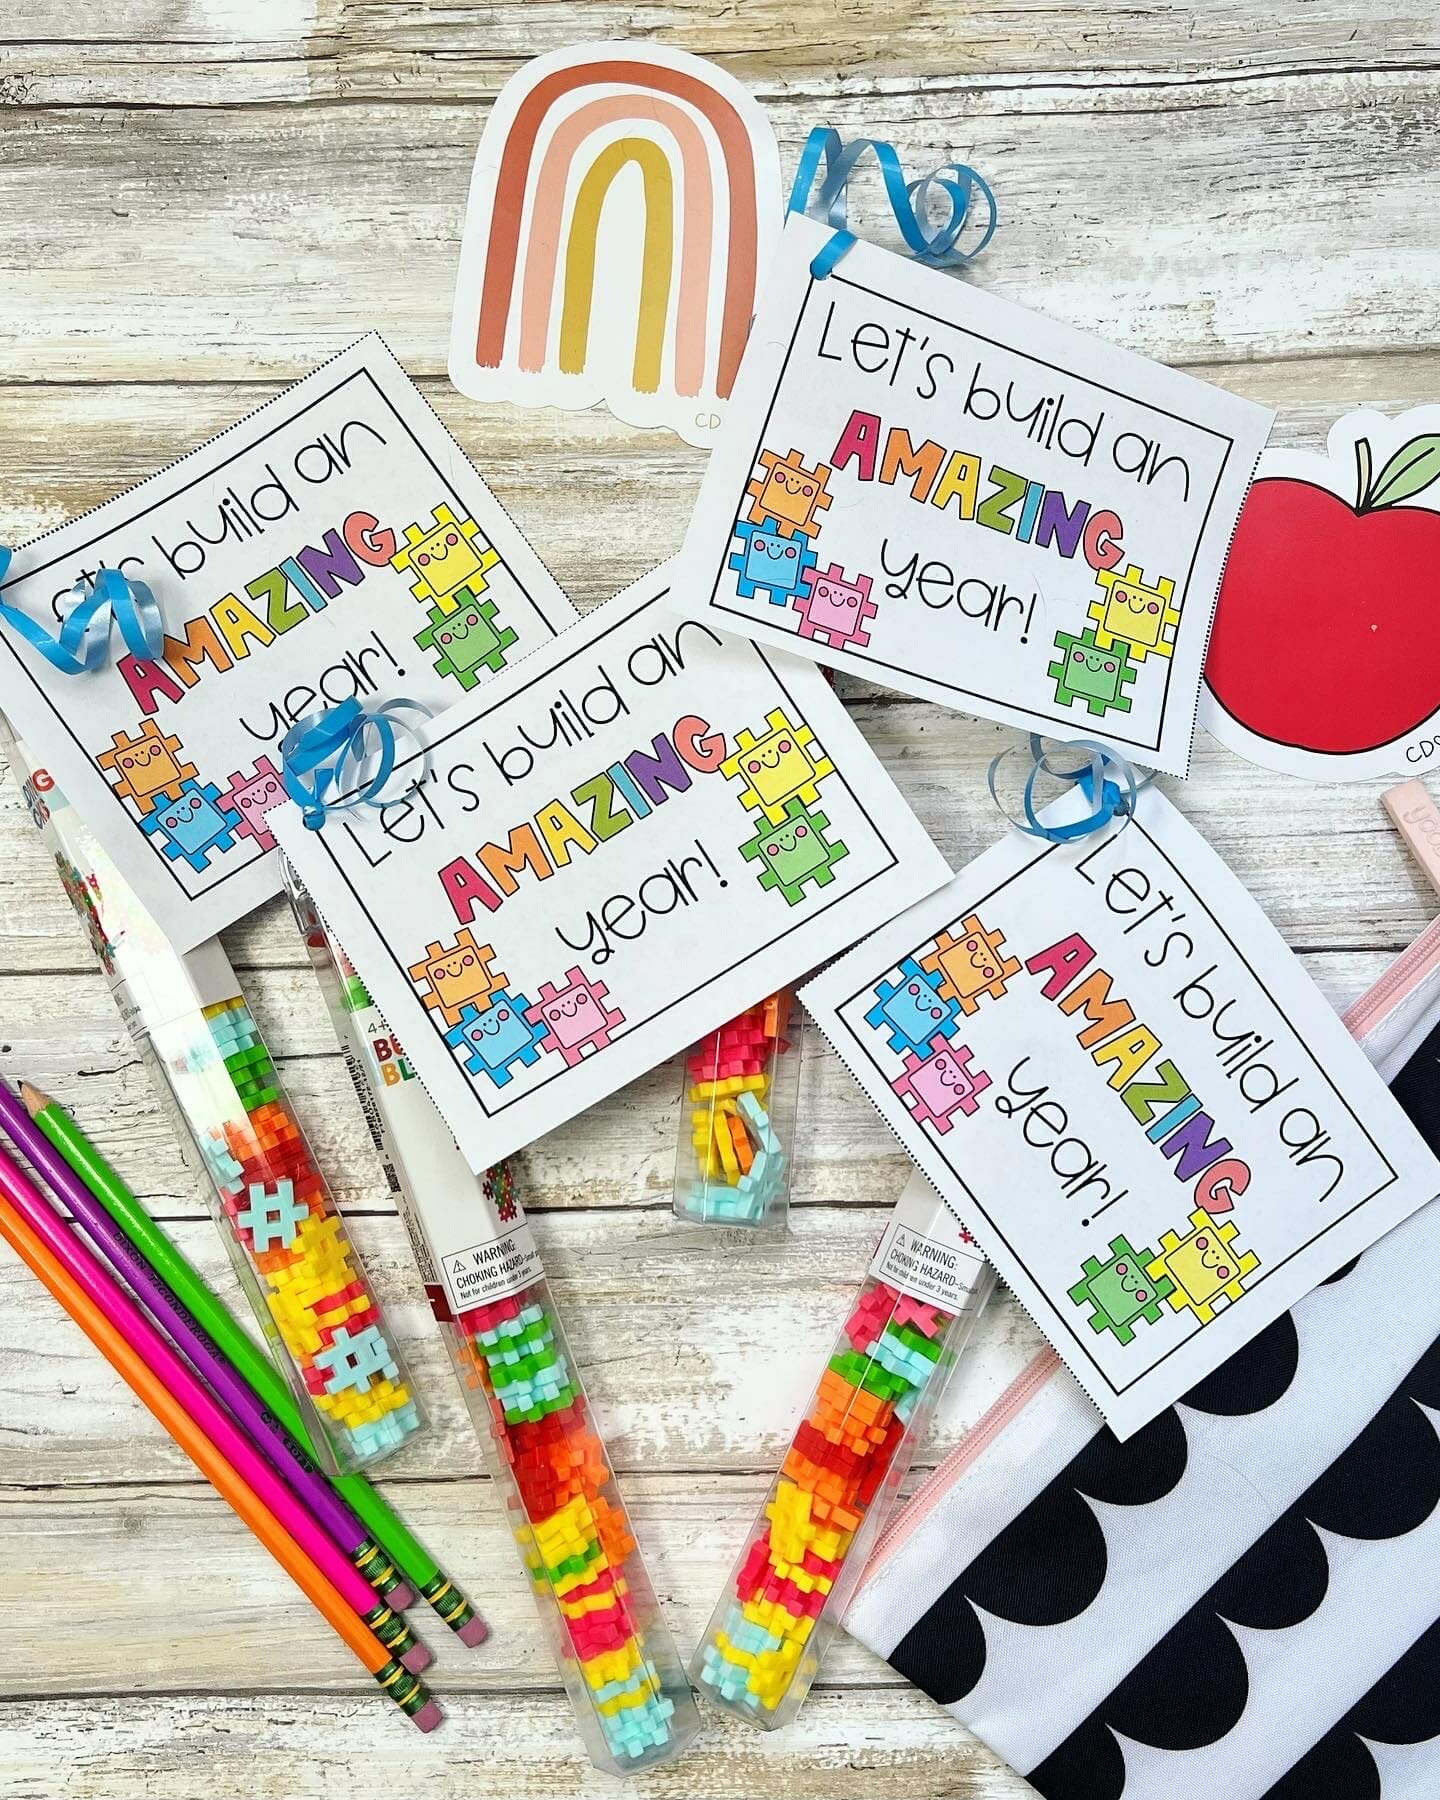 25 Fun Back to School Gifts for Kids - Little Learning Corner